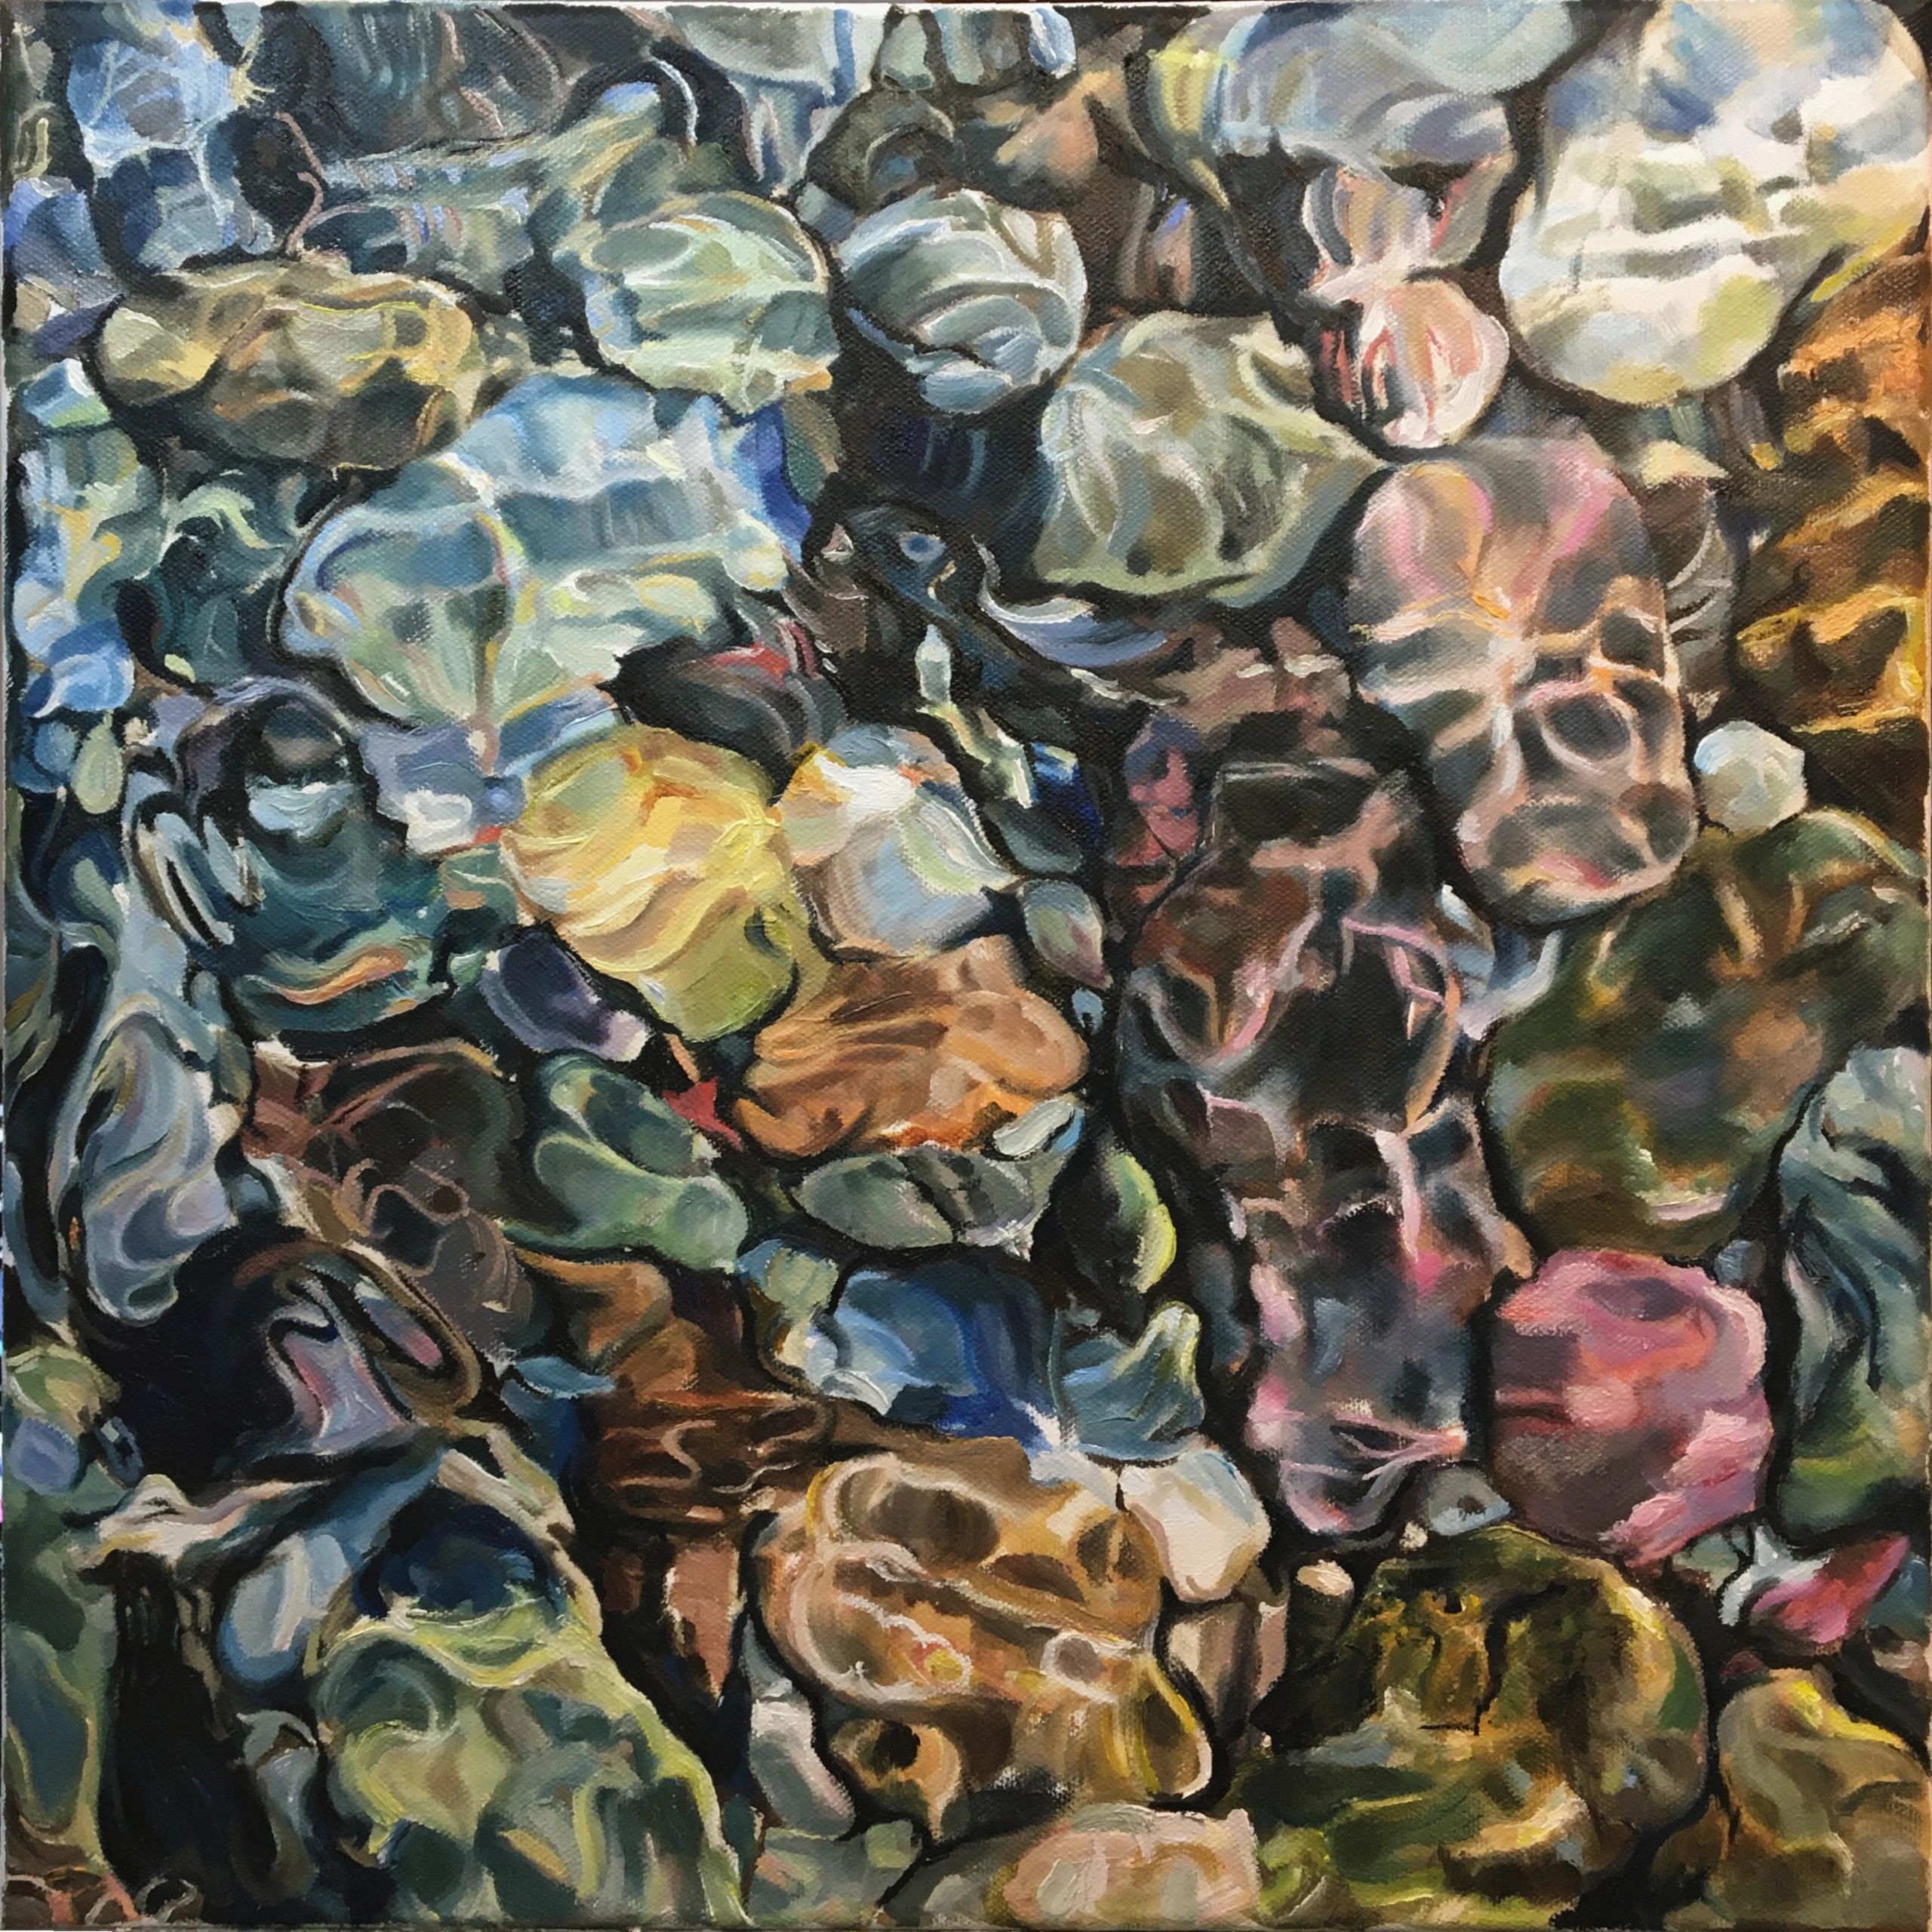 Oil painting on canvas, stones in river, semi abstract. Light reflections on water.